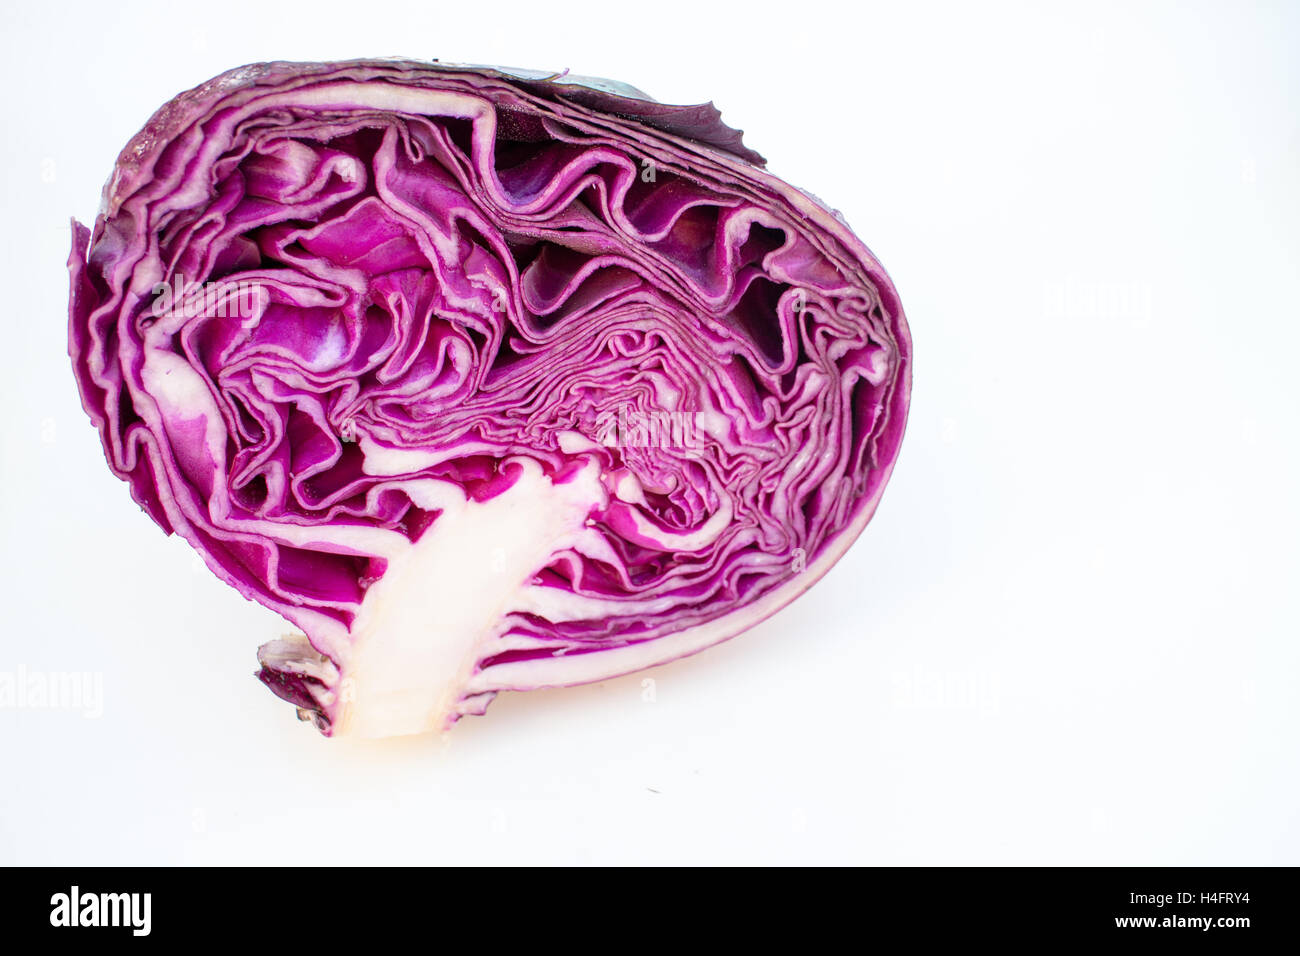 Half of a purple cabbage ready to be eaten, made into a creation, food inspired Stock Photo